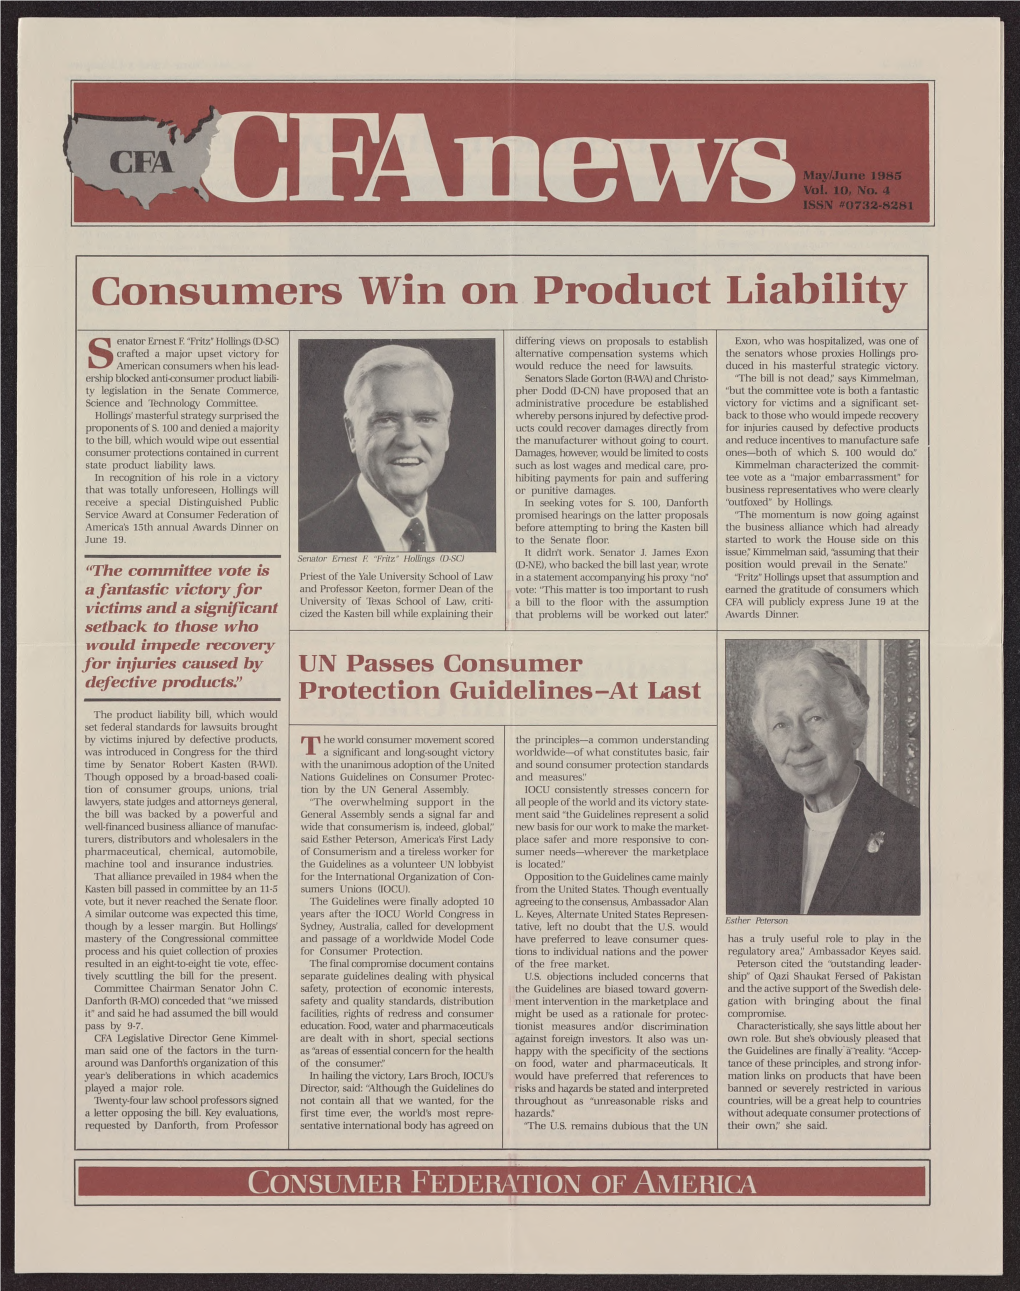 Consumers Win on Product Liability